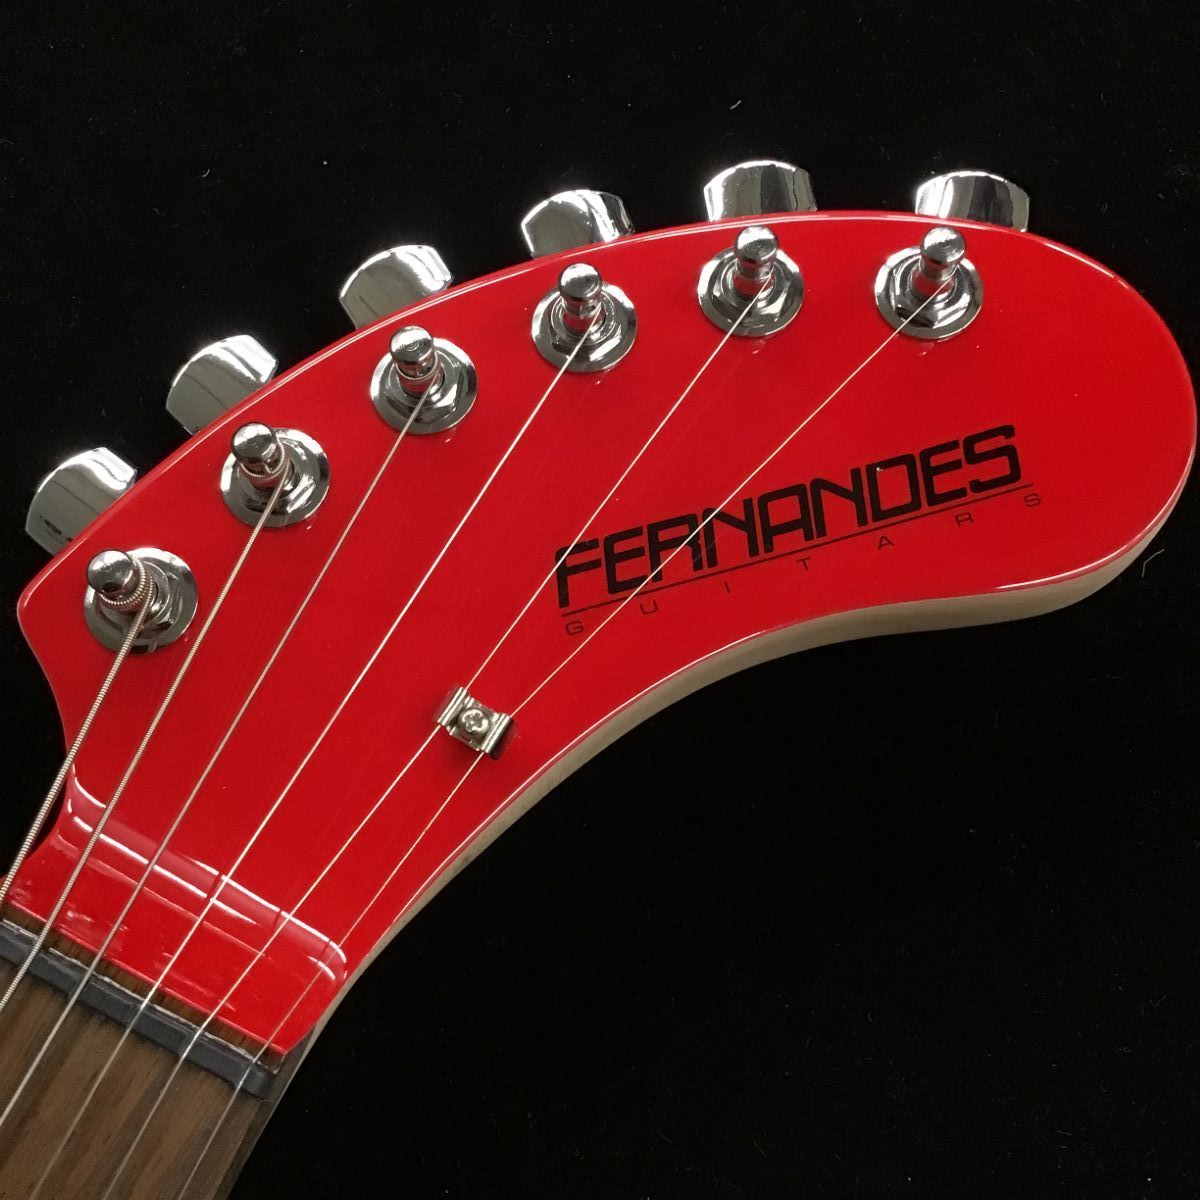 FERNANDES ZO-3 RED スピーカー内蔵ミニエレキギター レッド ソフト